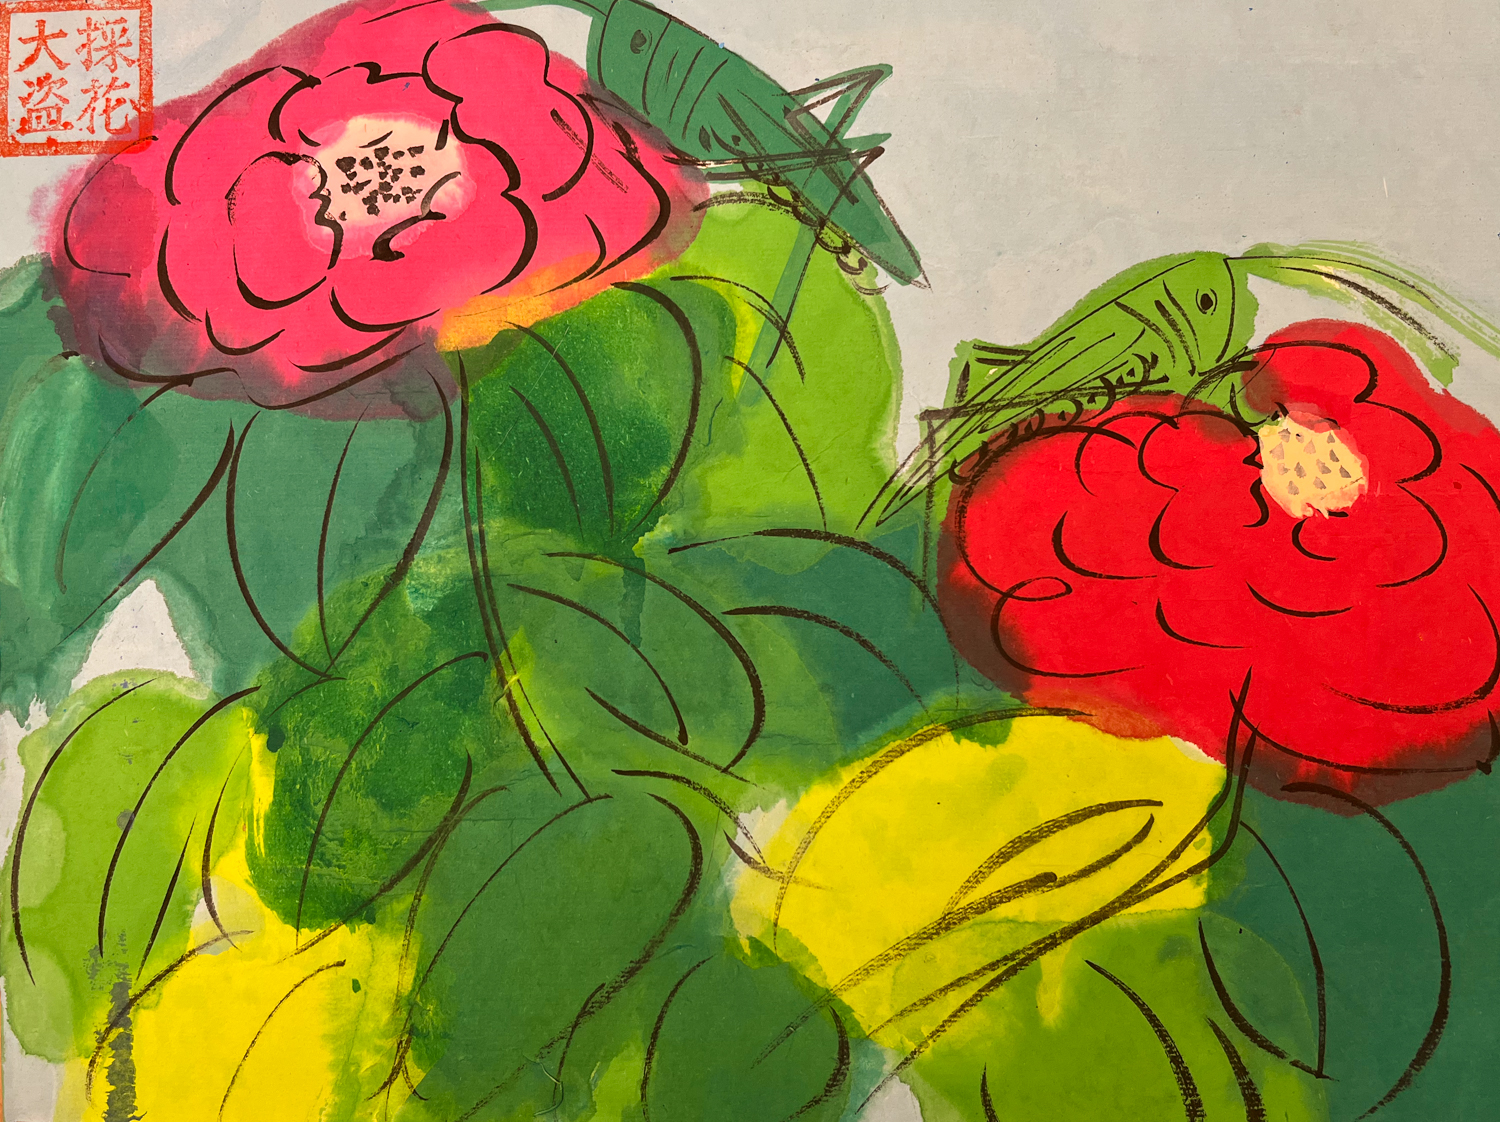 Walasse Ting, Grasshoppers with Roses, 1990s, Chinese ink & acrylic on rice paper, 23.5x33.5cm